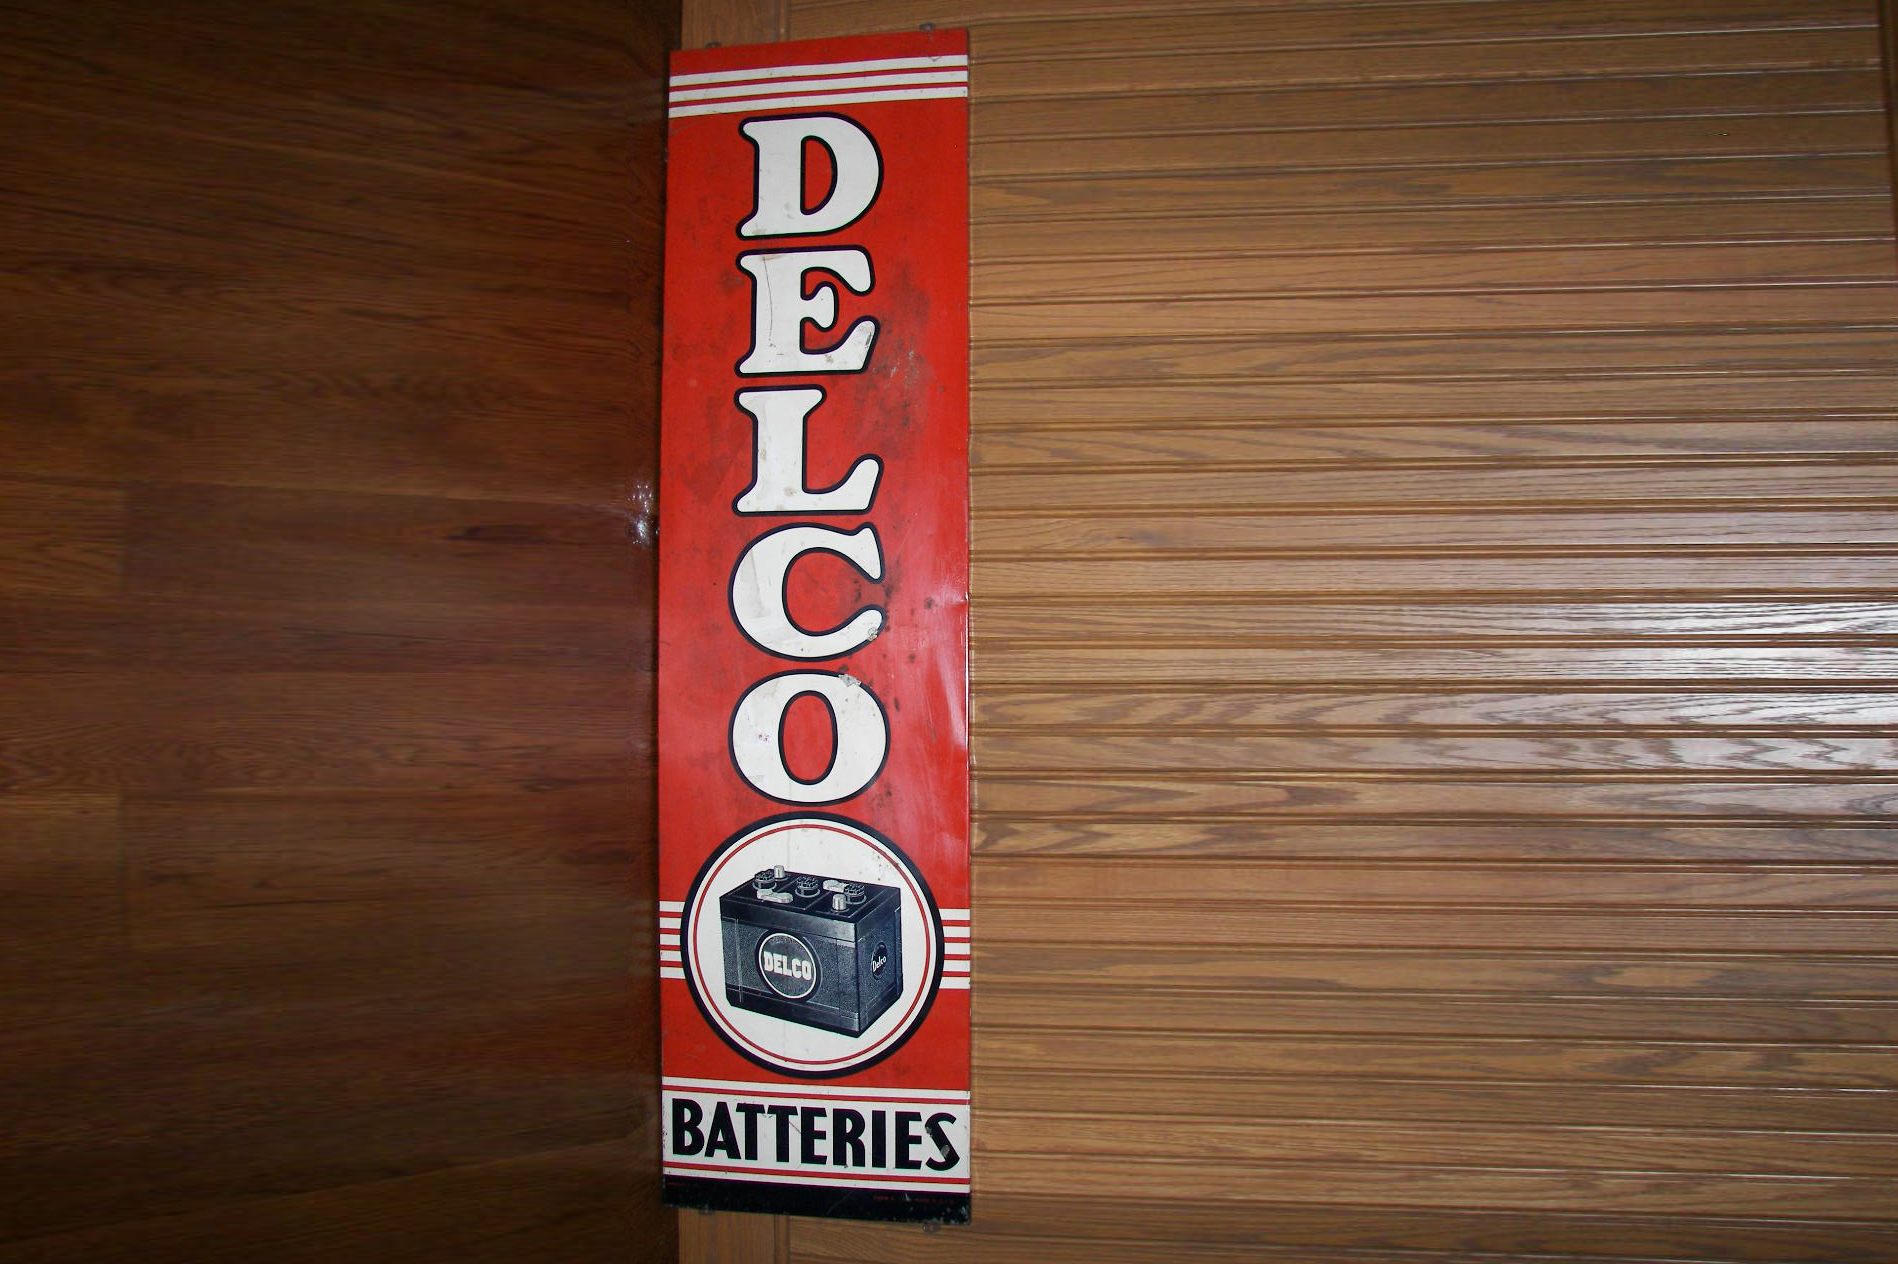 0th Image of a N/A DELCO BATTERIES METAL SIGN